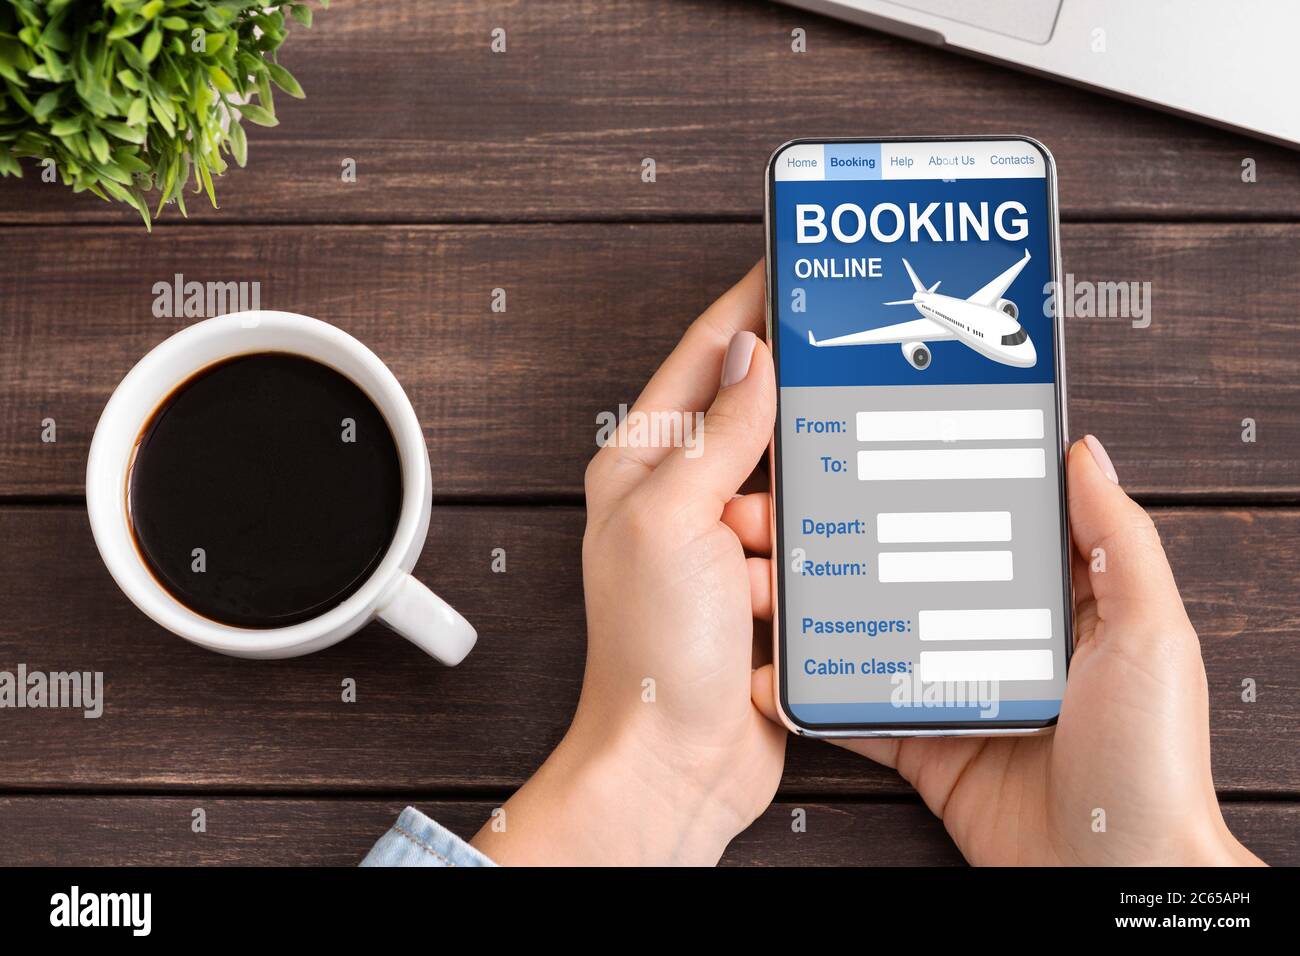 Lady With Smartphone Booking Flight Tickets Sitting At Desk Indoors Stock Photo